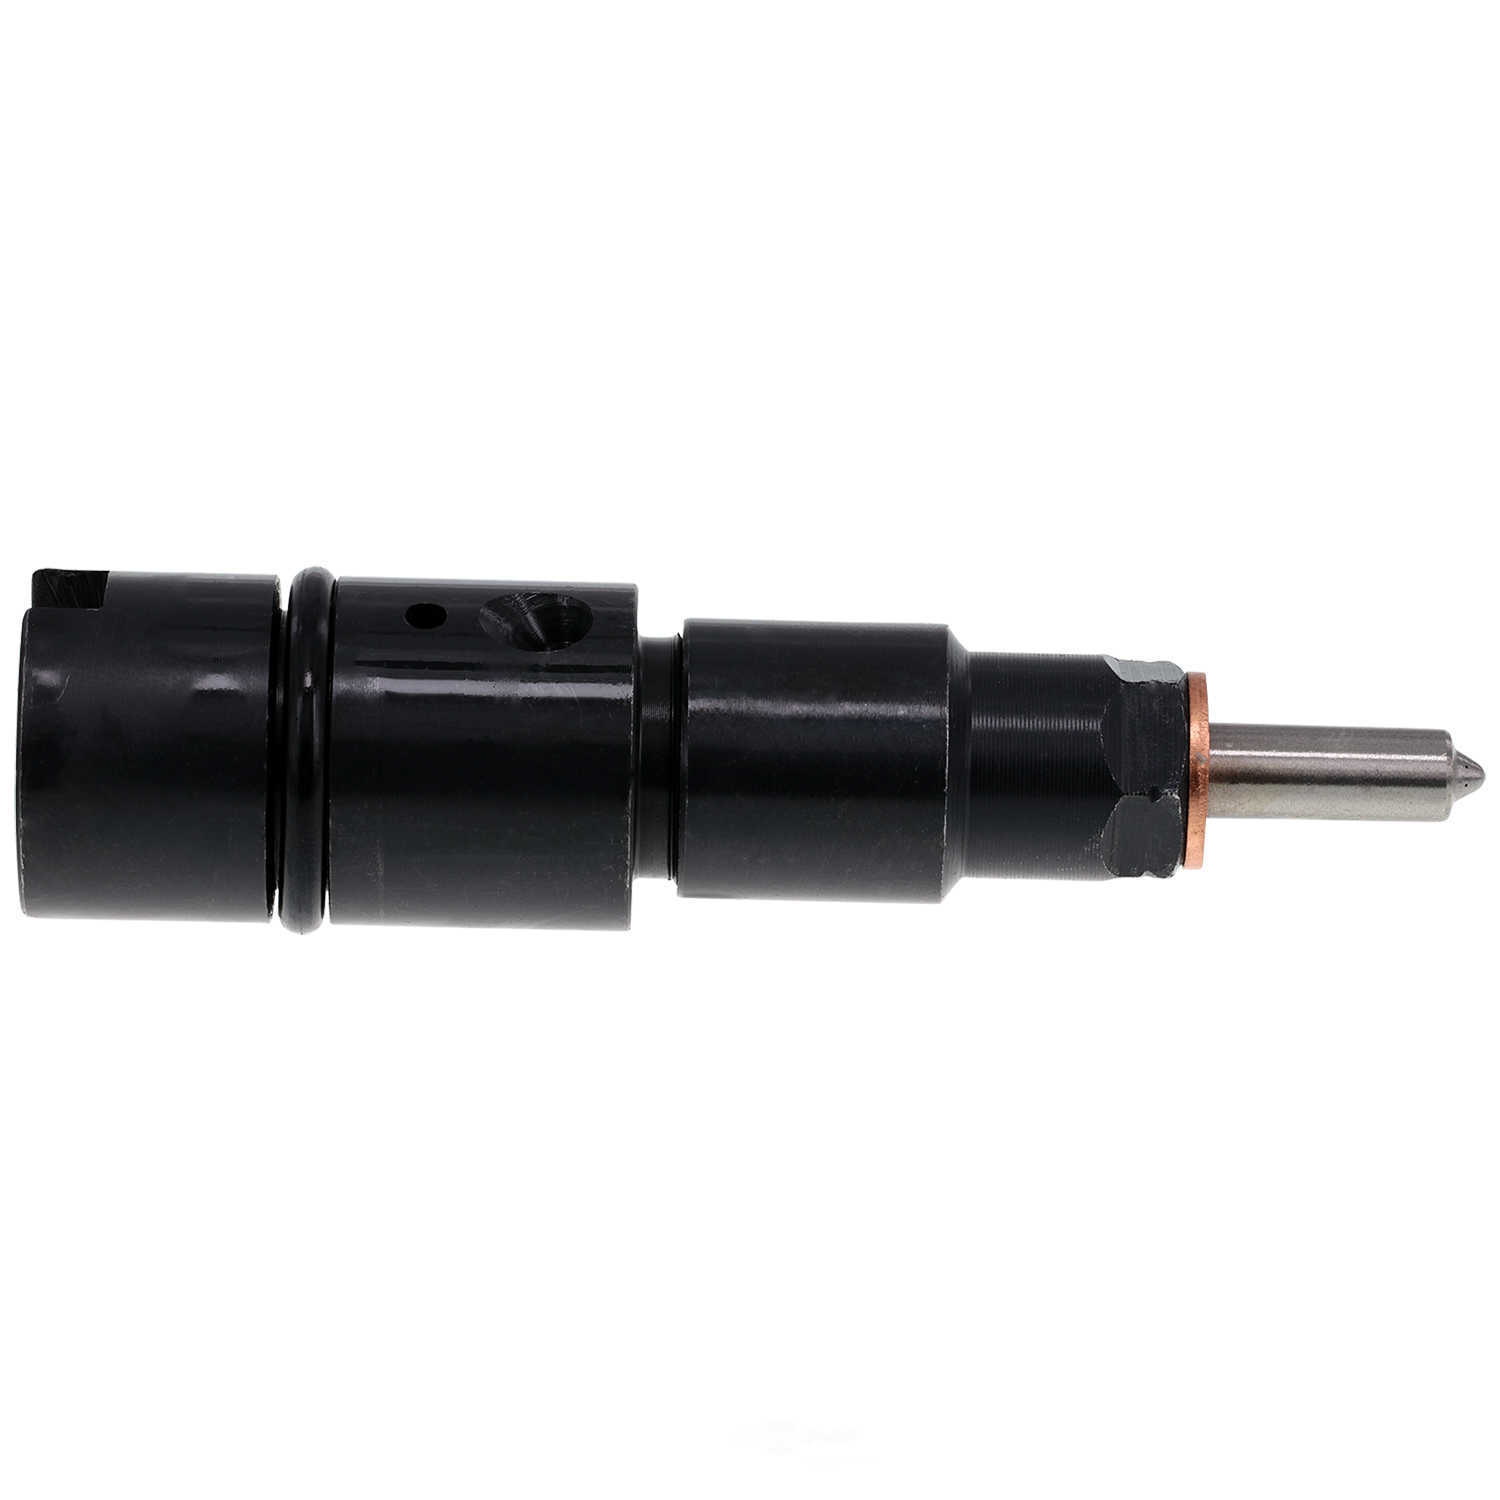 GB REMANUFACTURING INC. - New Diesel Fuel Injector - GBR 611-106